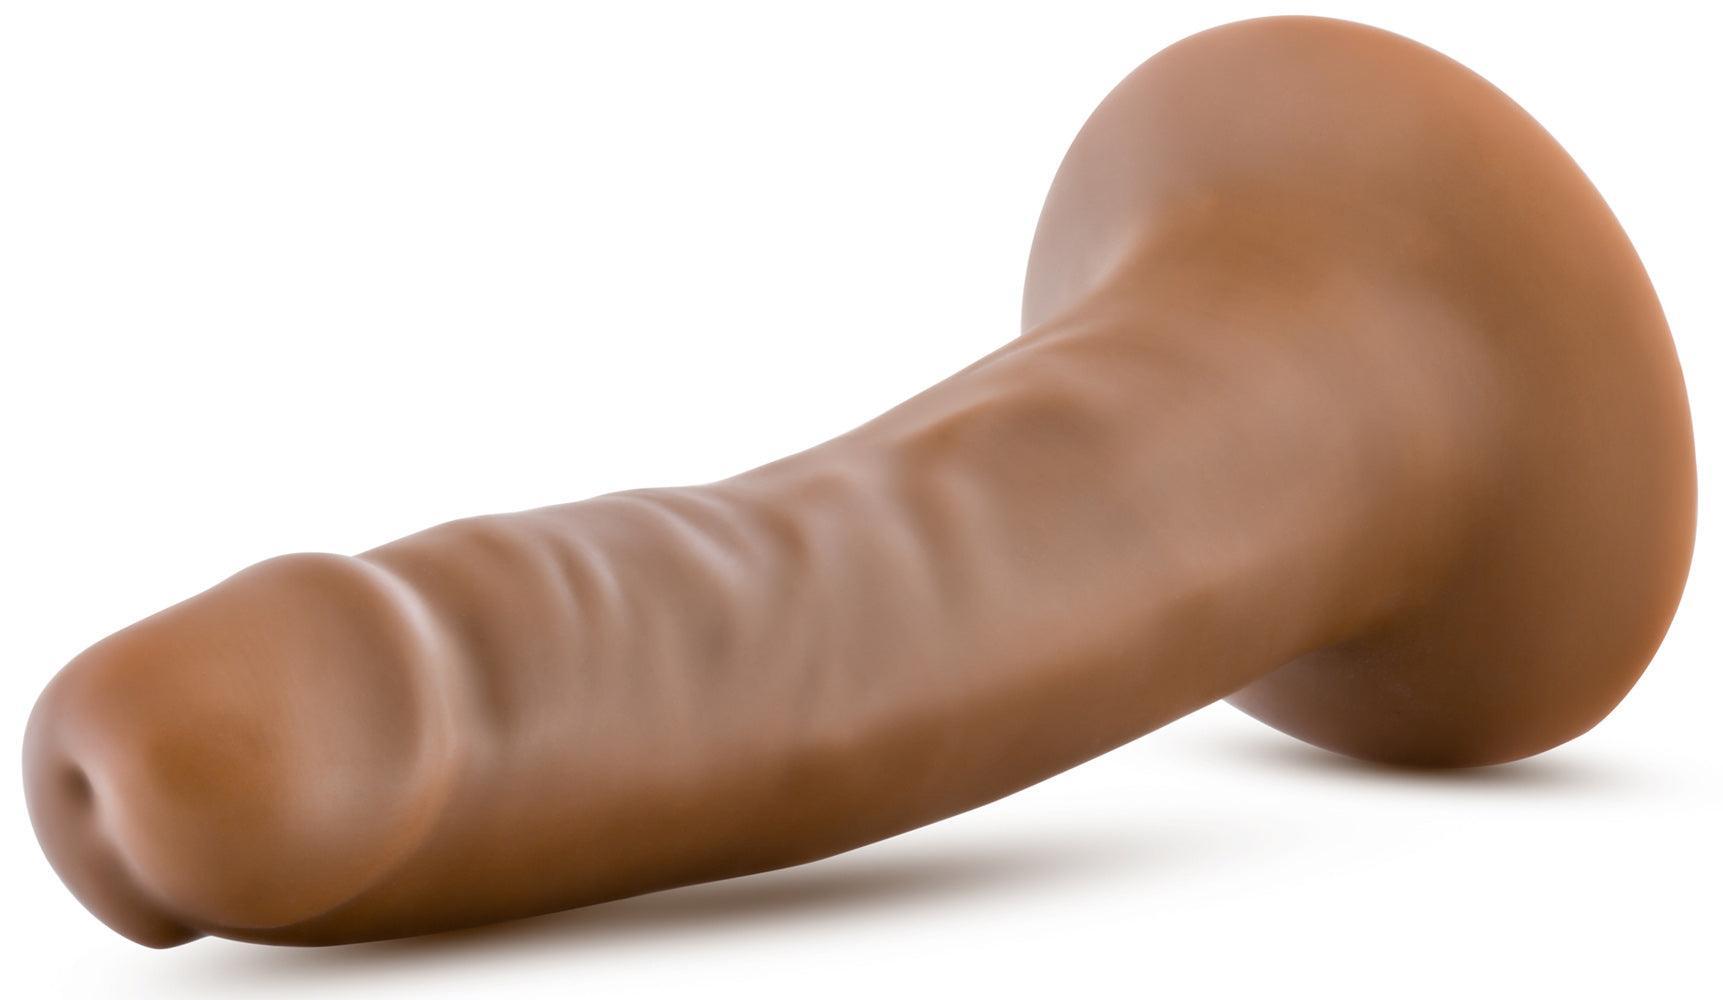 Dr. Skin Silicone - Dr. Lucas - 5 Inch Dong With Suction Cup - Mocha - My Sex Toy Hub